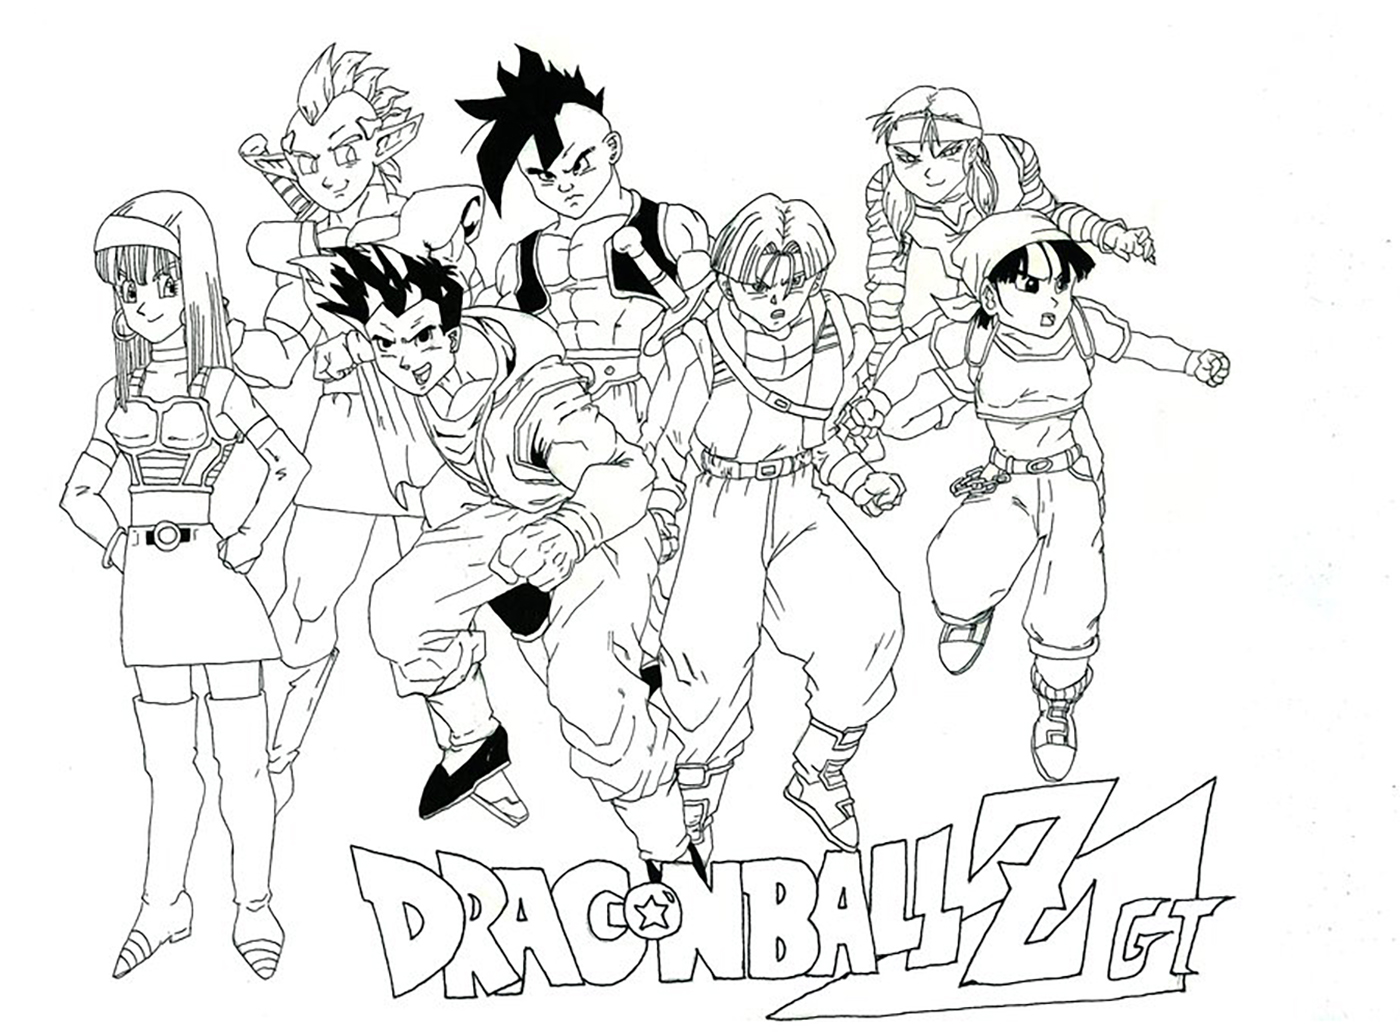 Oob Bulma Trunks Yamcha Videl and Warriors - Dragon Ball Z Kids Coloring  Pages